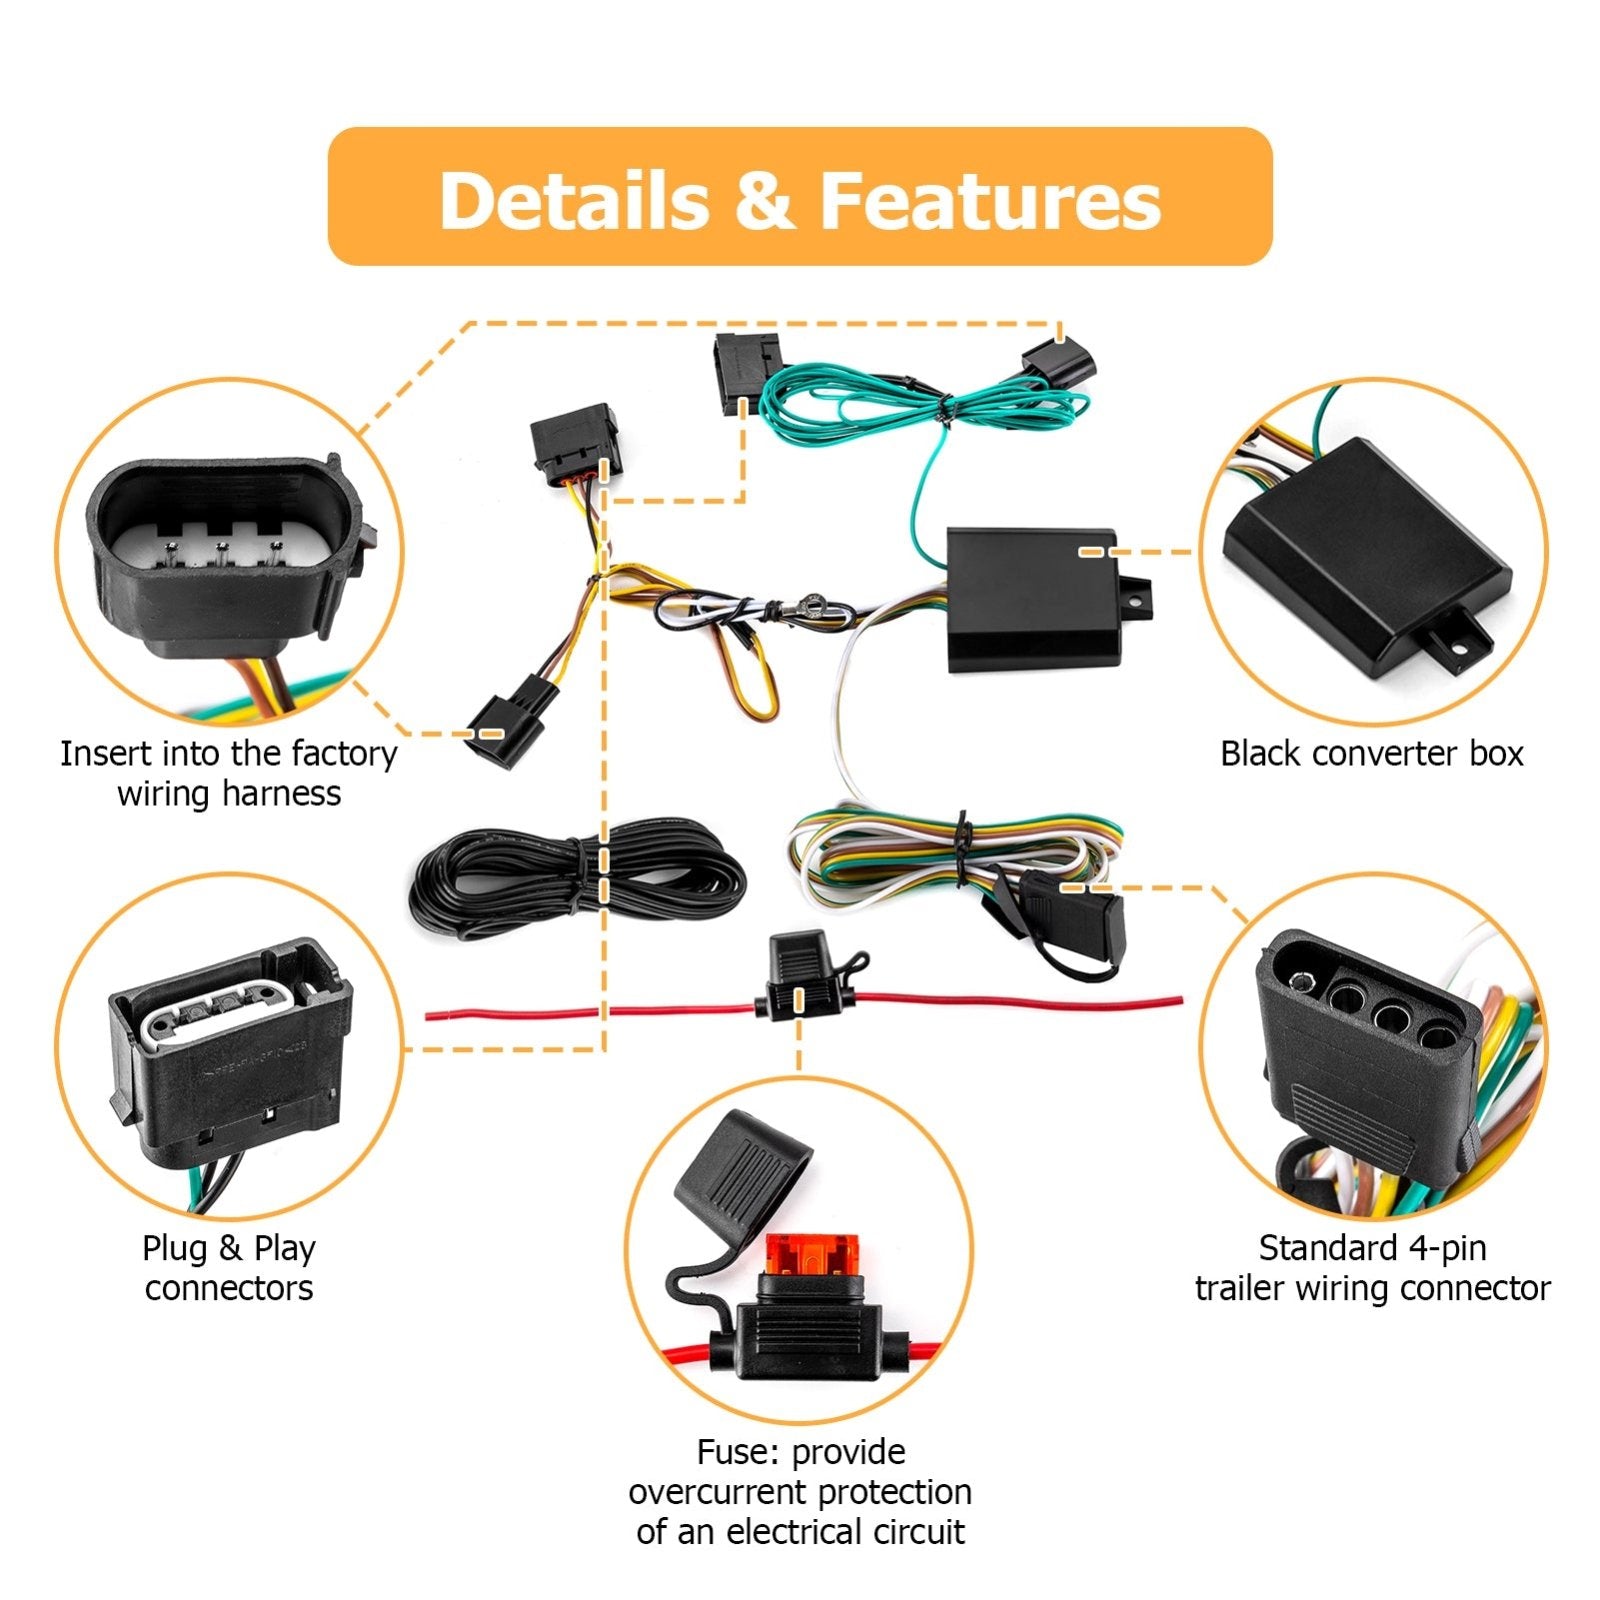 Vehicle-Side 4-Pin Trailer Wiring Harness for 2004-2012 Ford Edge, Escape, Freestar, Lincoln MKX, Mazda Tribute, Mercury Mariner - Weisen